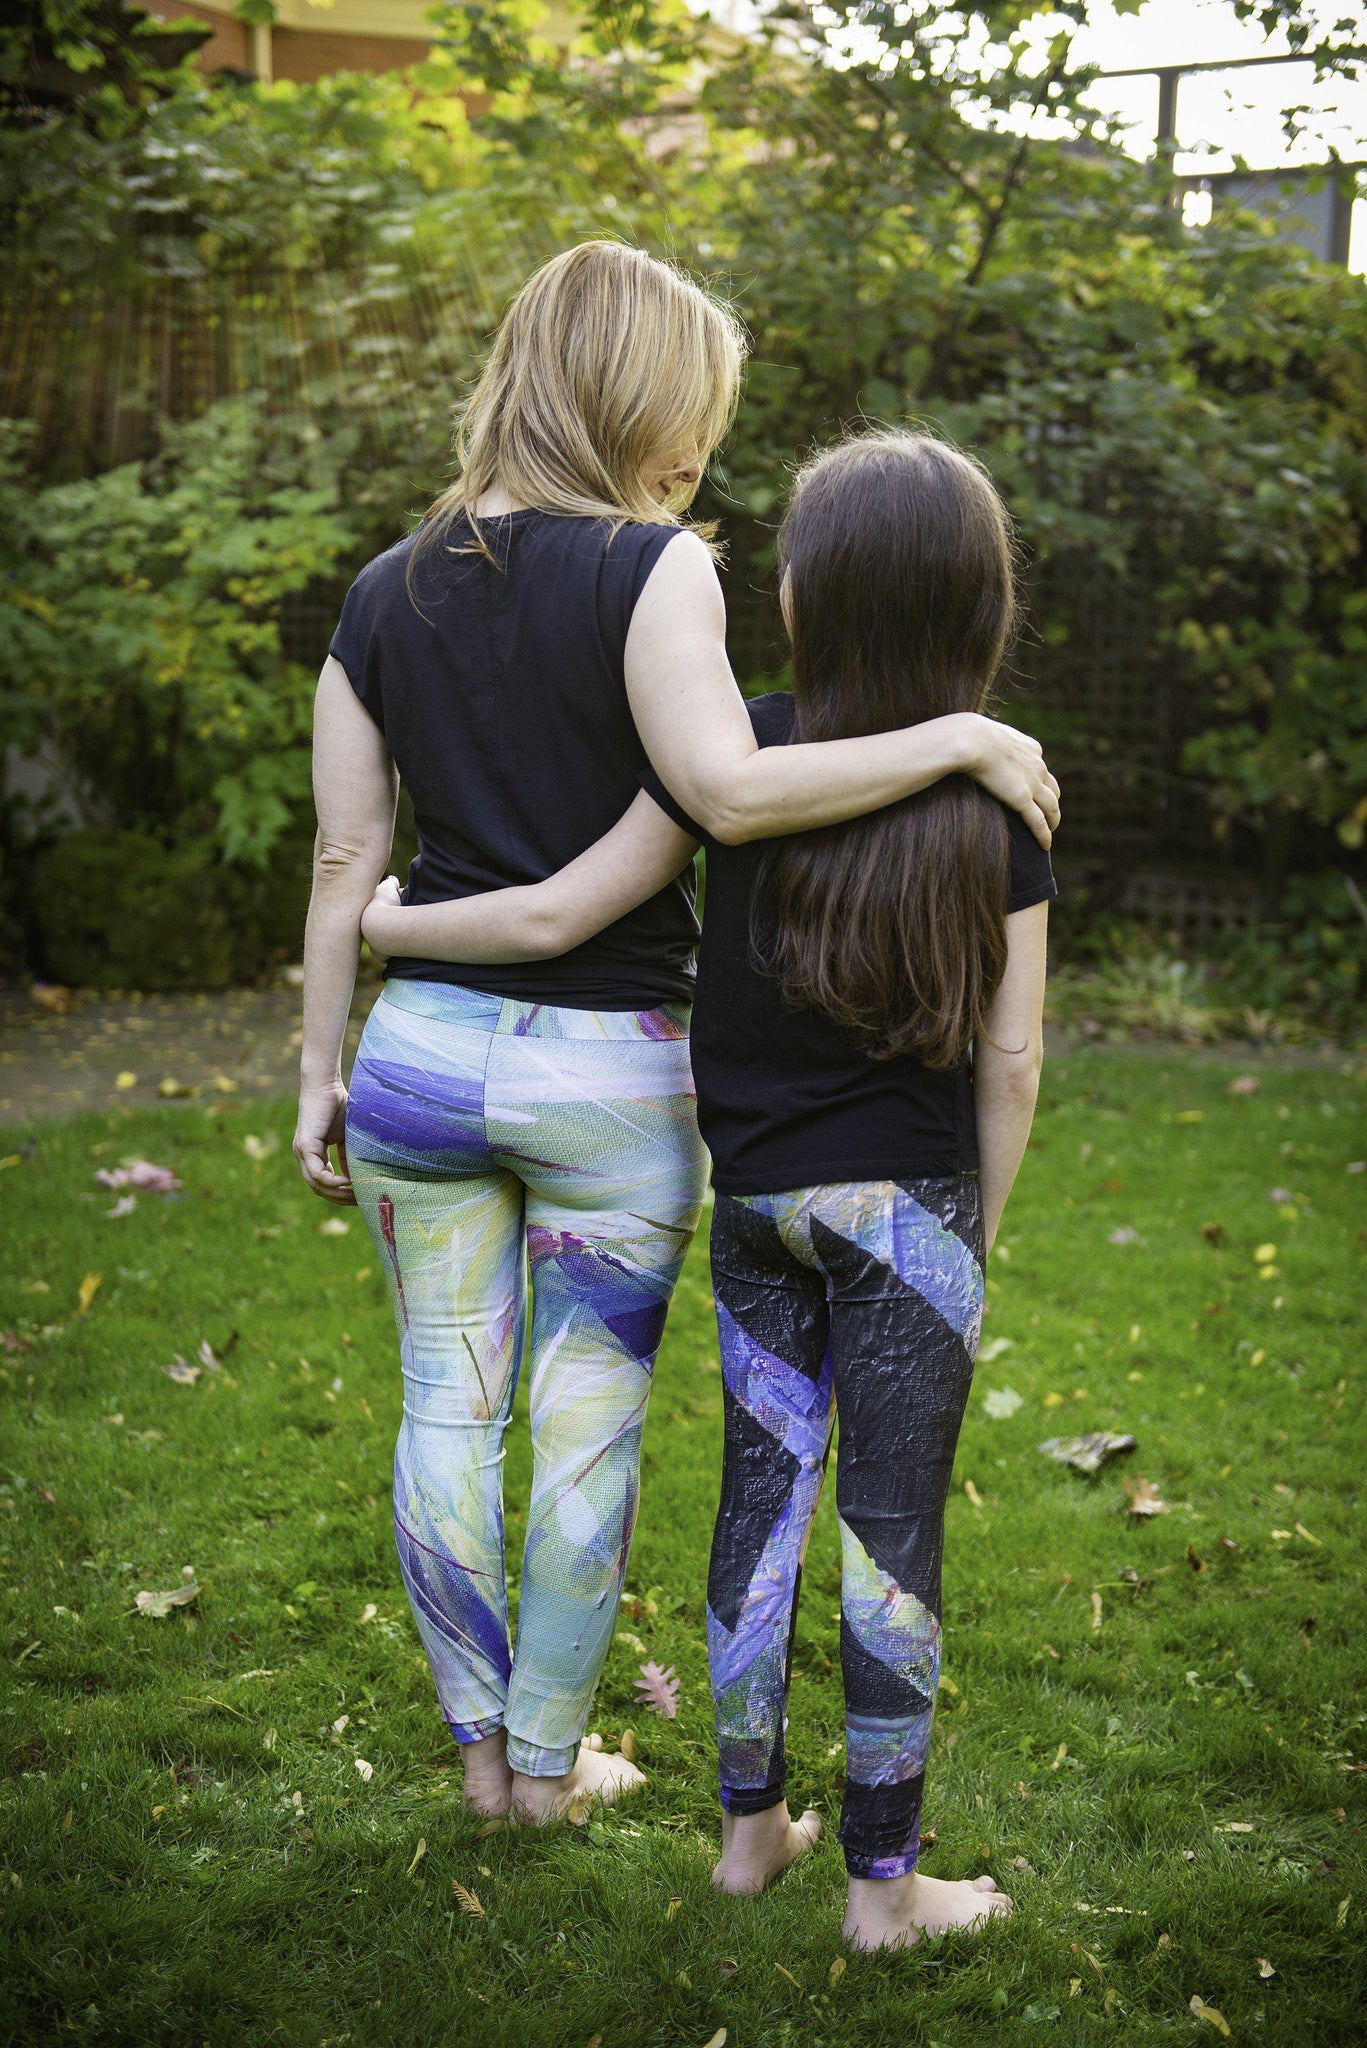 Shop in Style for your Daughter's Kids XL Leggings with Lularoe